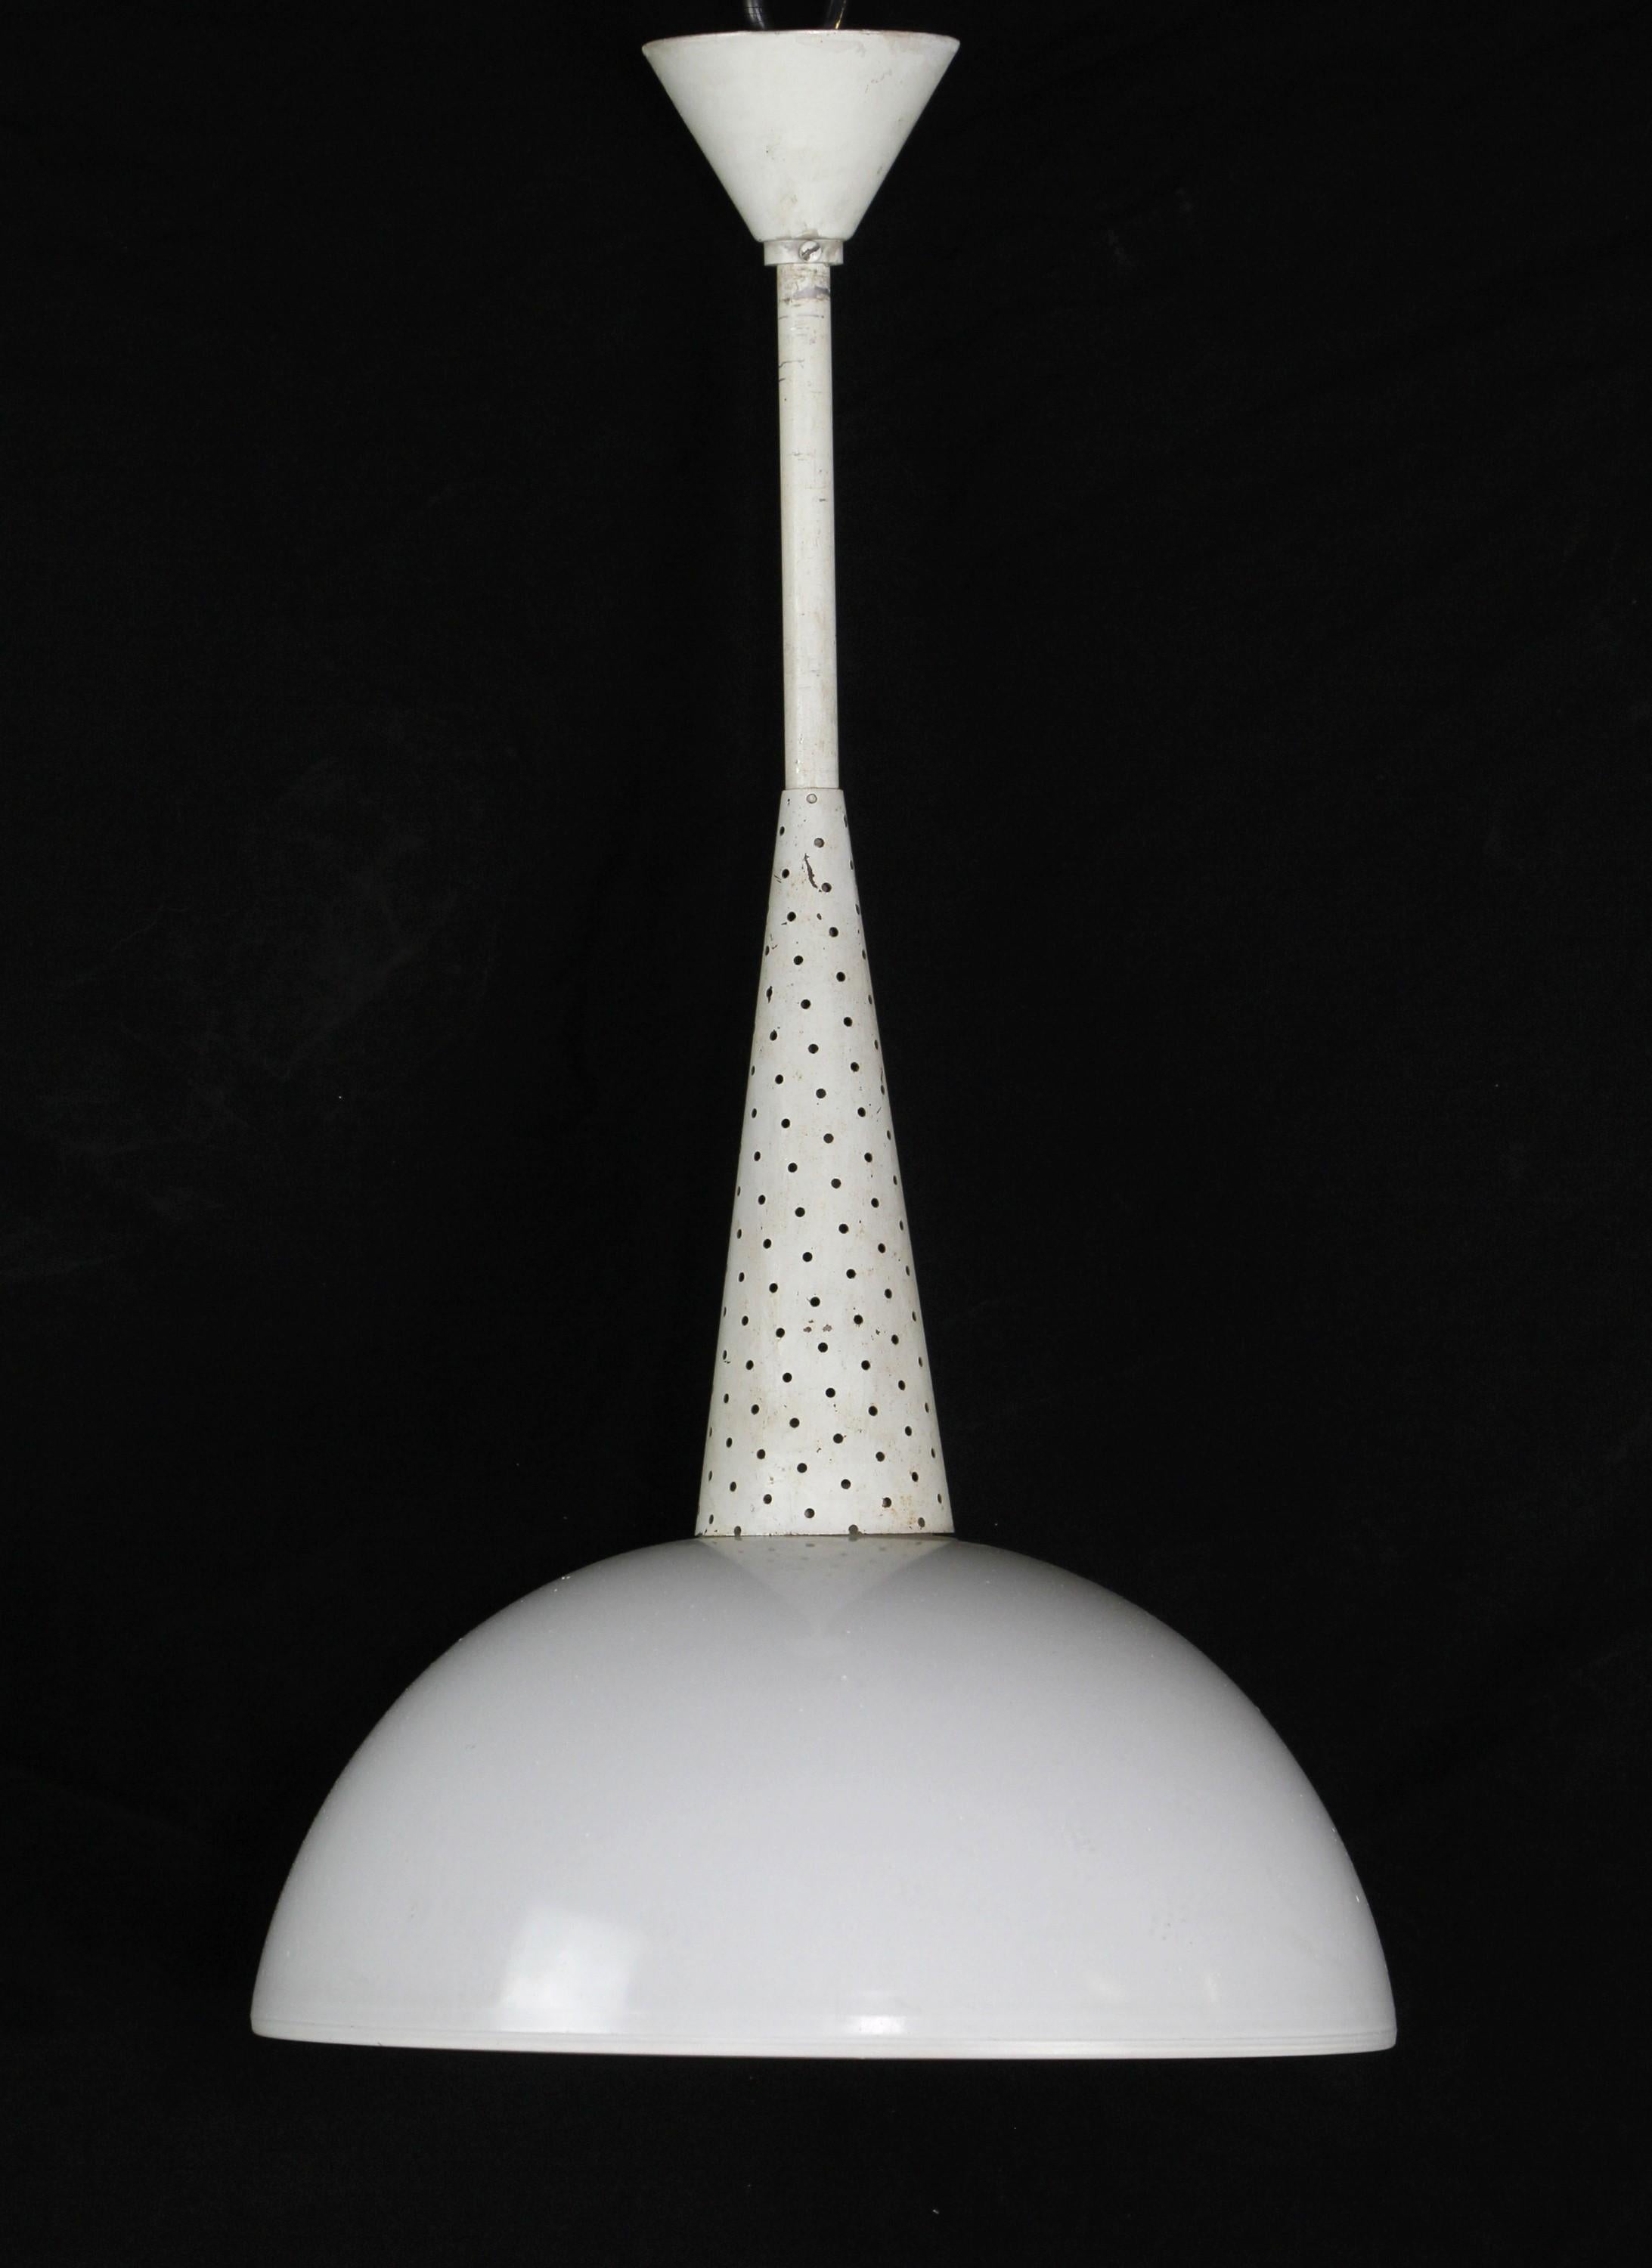 European milk glass pendant light with clear glass bottom shade and white steel frame. Small quantity available at time of posting. Priced each. Please inquire. Please note, this item is located in our Scranton, PA location.